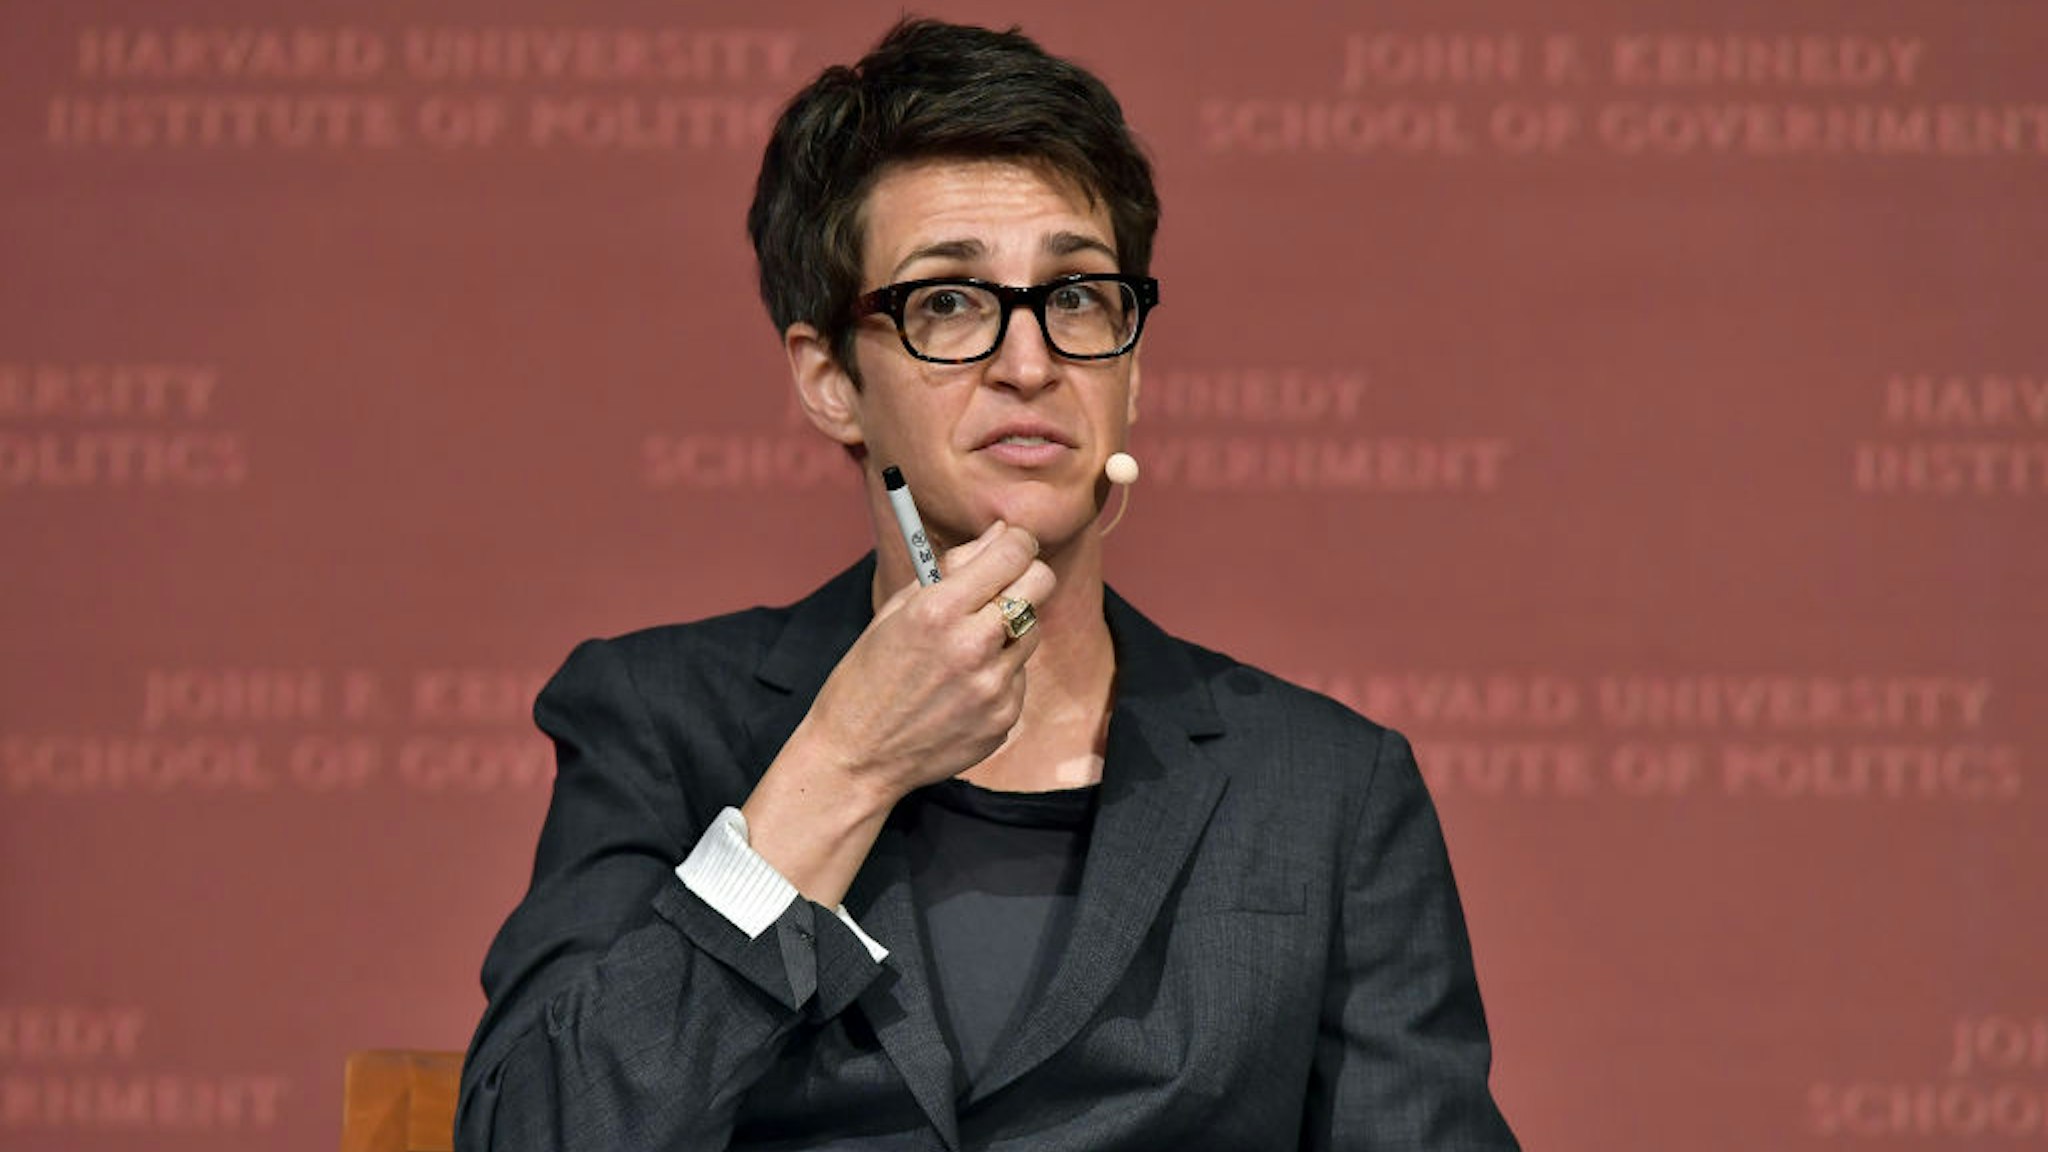 CAMBRIDGE, MA - OCTOBER 16: Rachel Maddow speaks at the Harvard University John F. Kennedy Jr. Forum in a program titled "Perspectives on National Security" moderated by Rachel Maddow on October 16, 2017 in Cambridge, Massachusetts. (Photo by Paul Marotta/Getty Images)